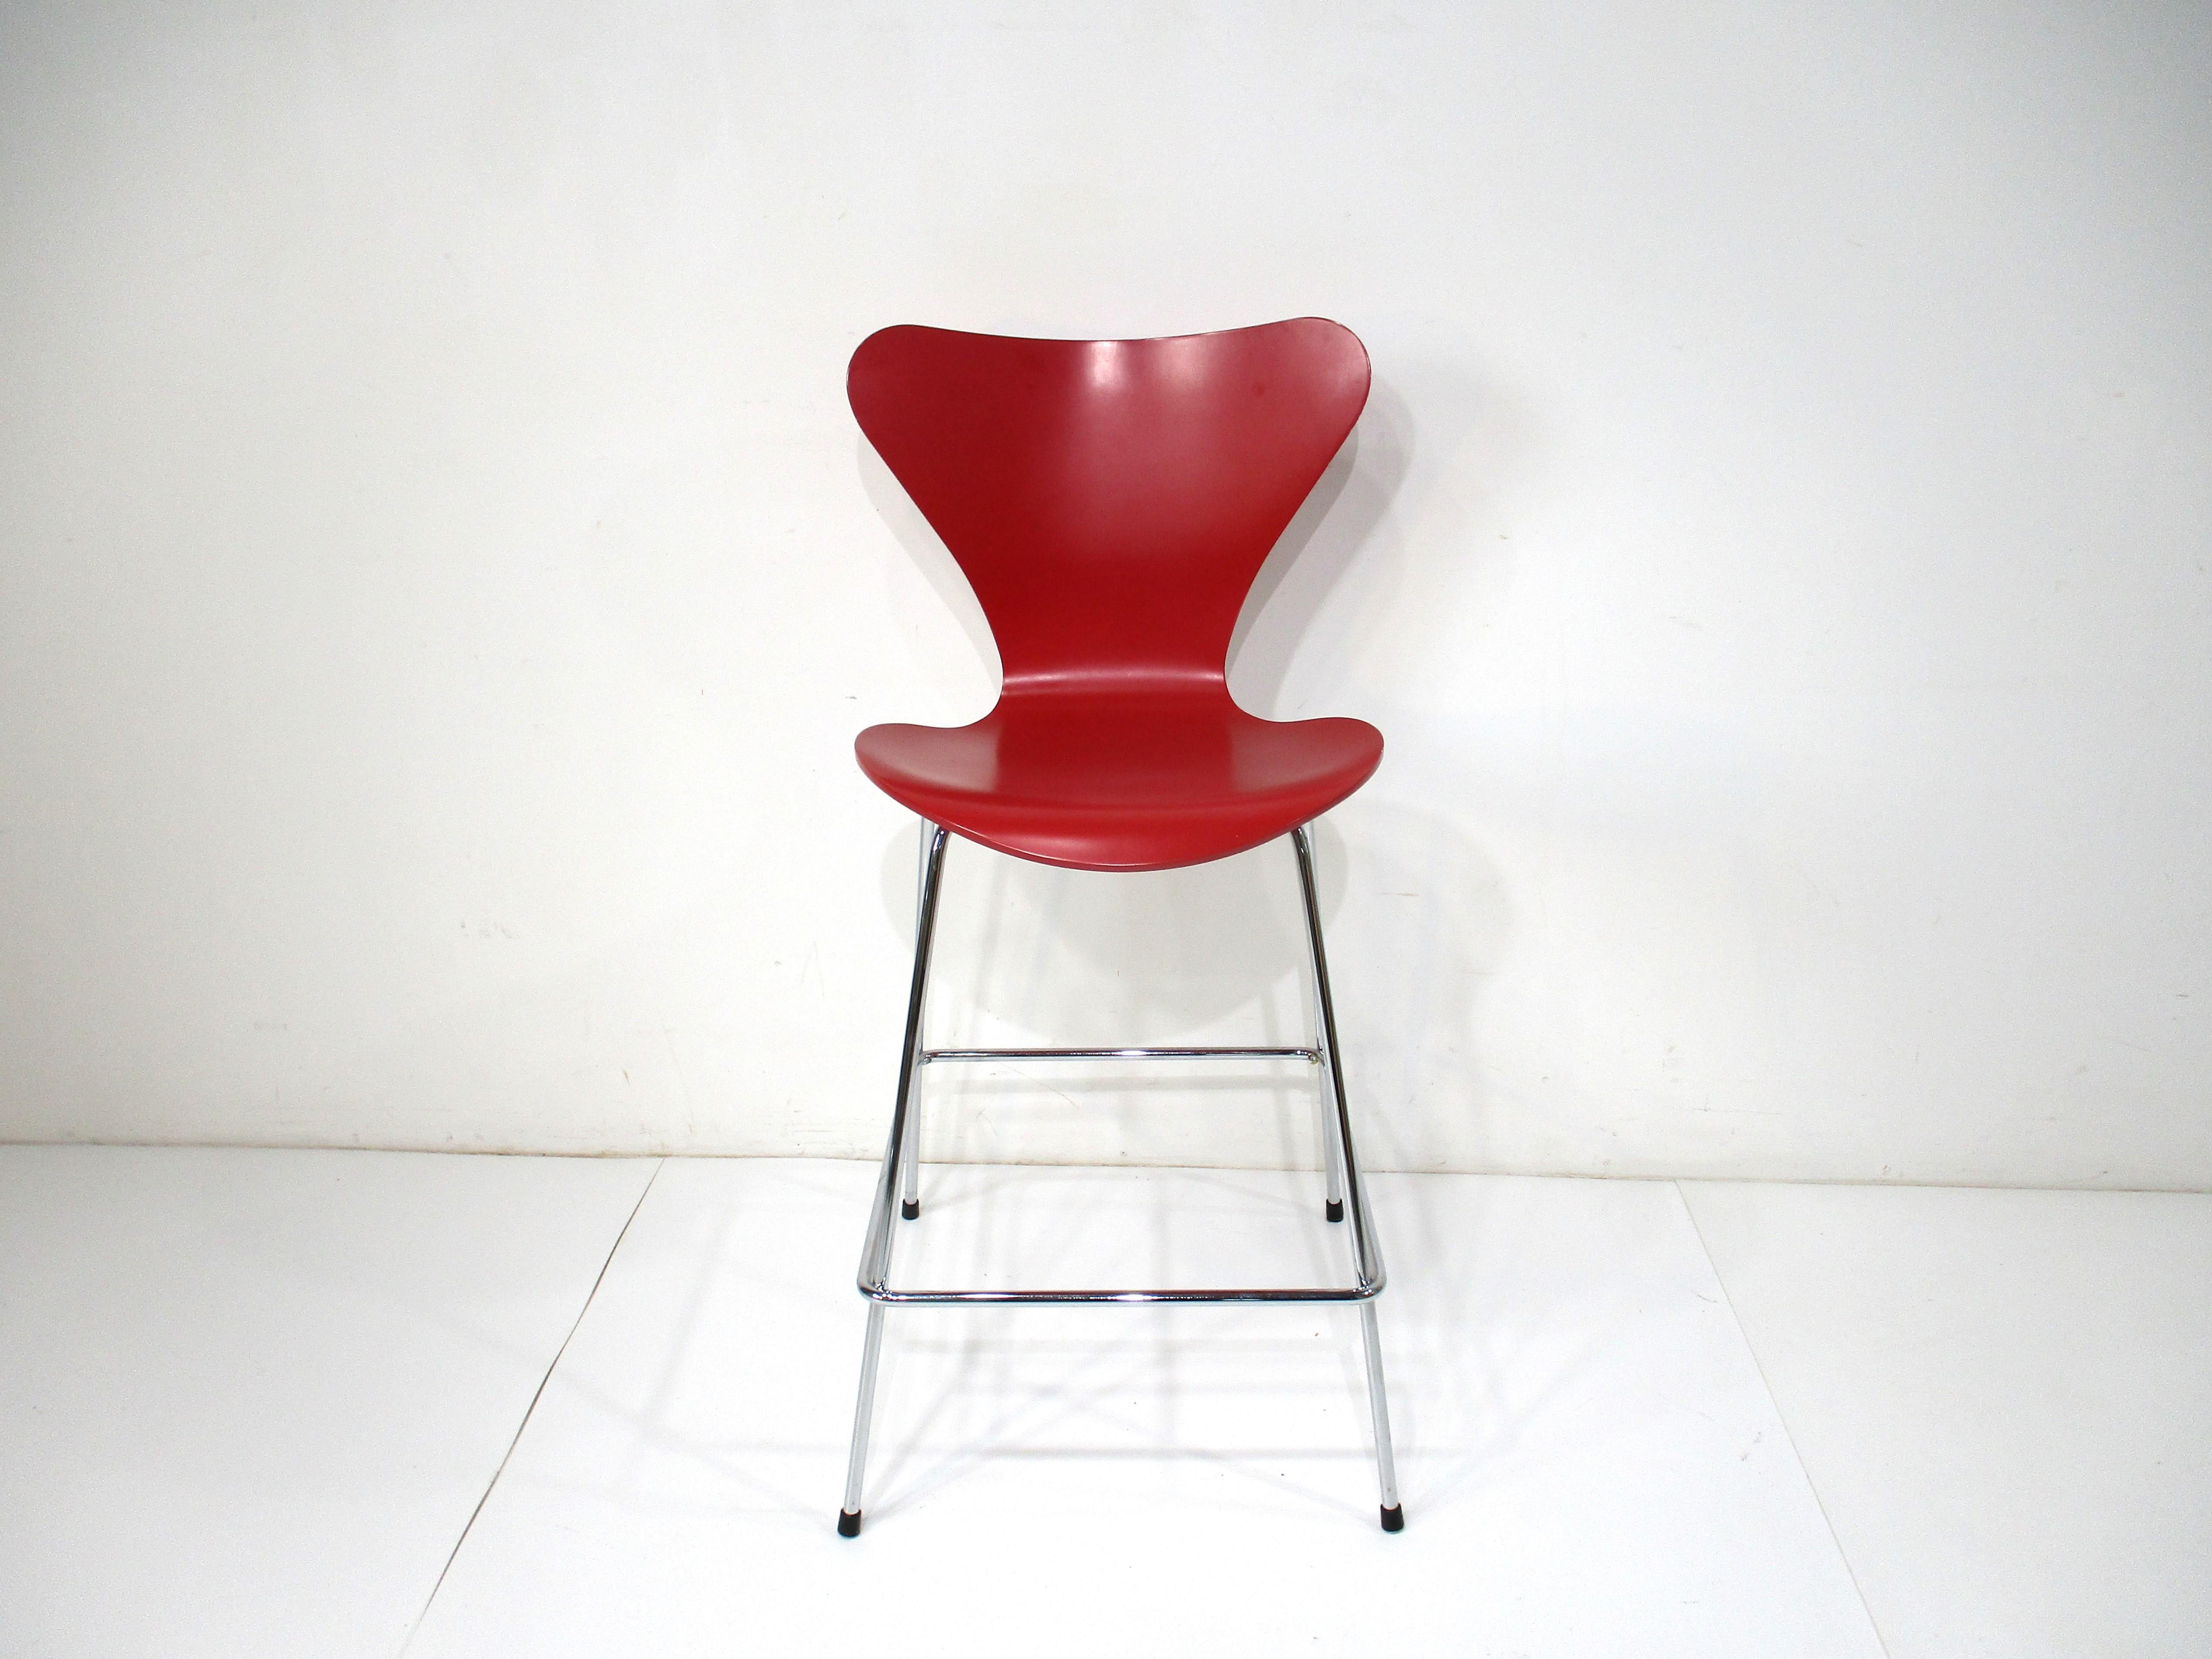 A set of four counter stools having red molded plywood seats on chromed metal frames with rubber foot pads to protect your floors . These bar / counter stools have foot rests to the lower frame for comfort . Designed by Arne Jacobsen and